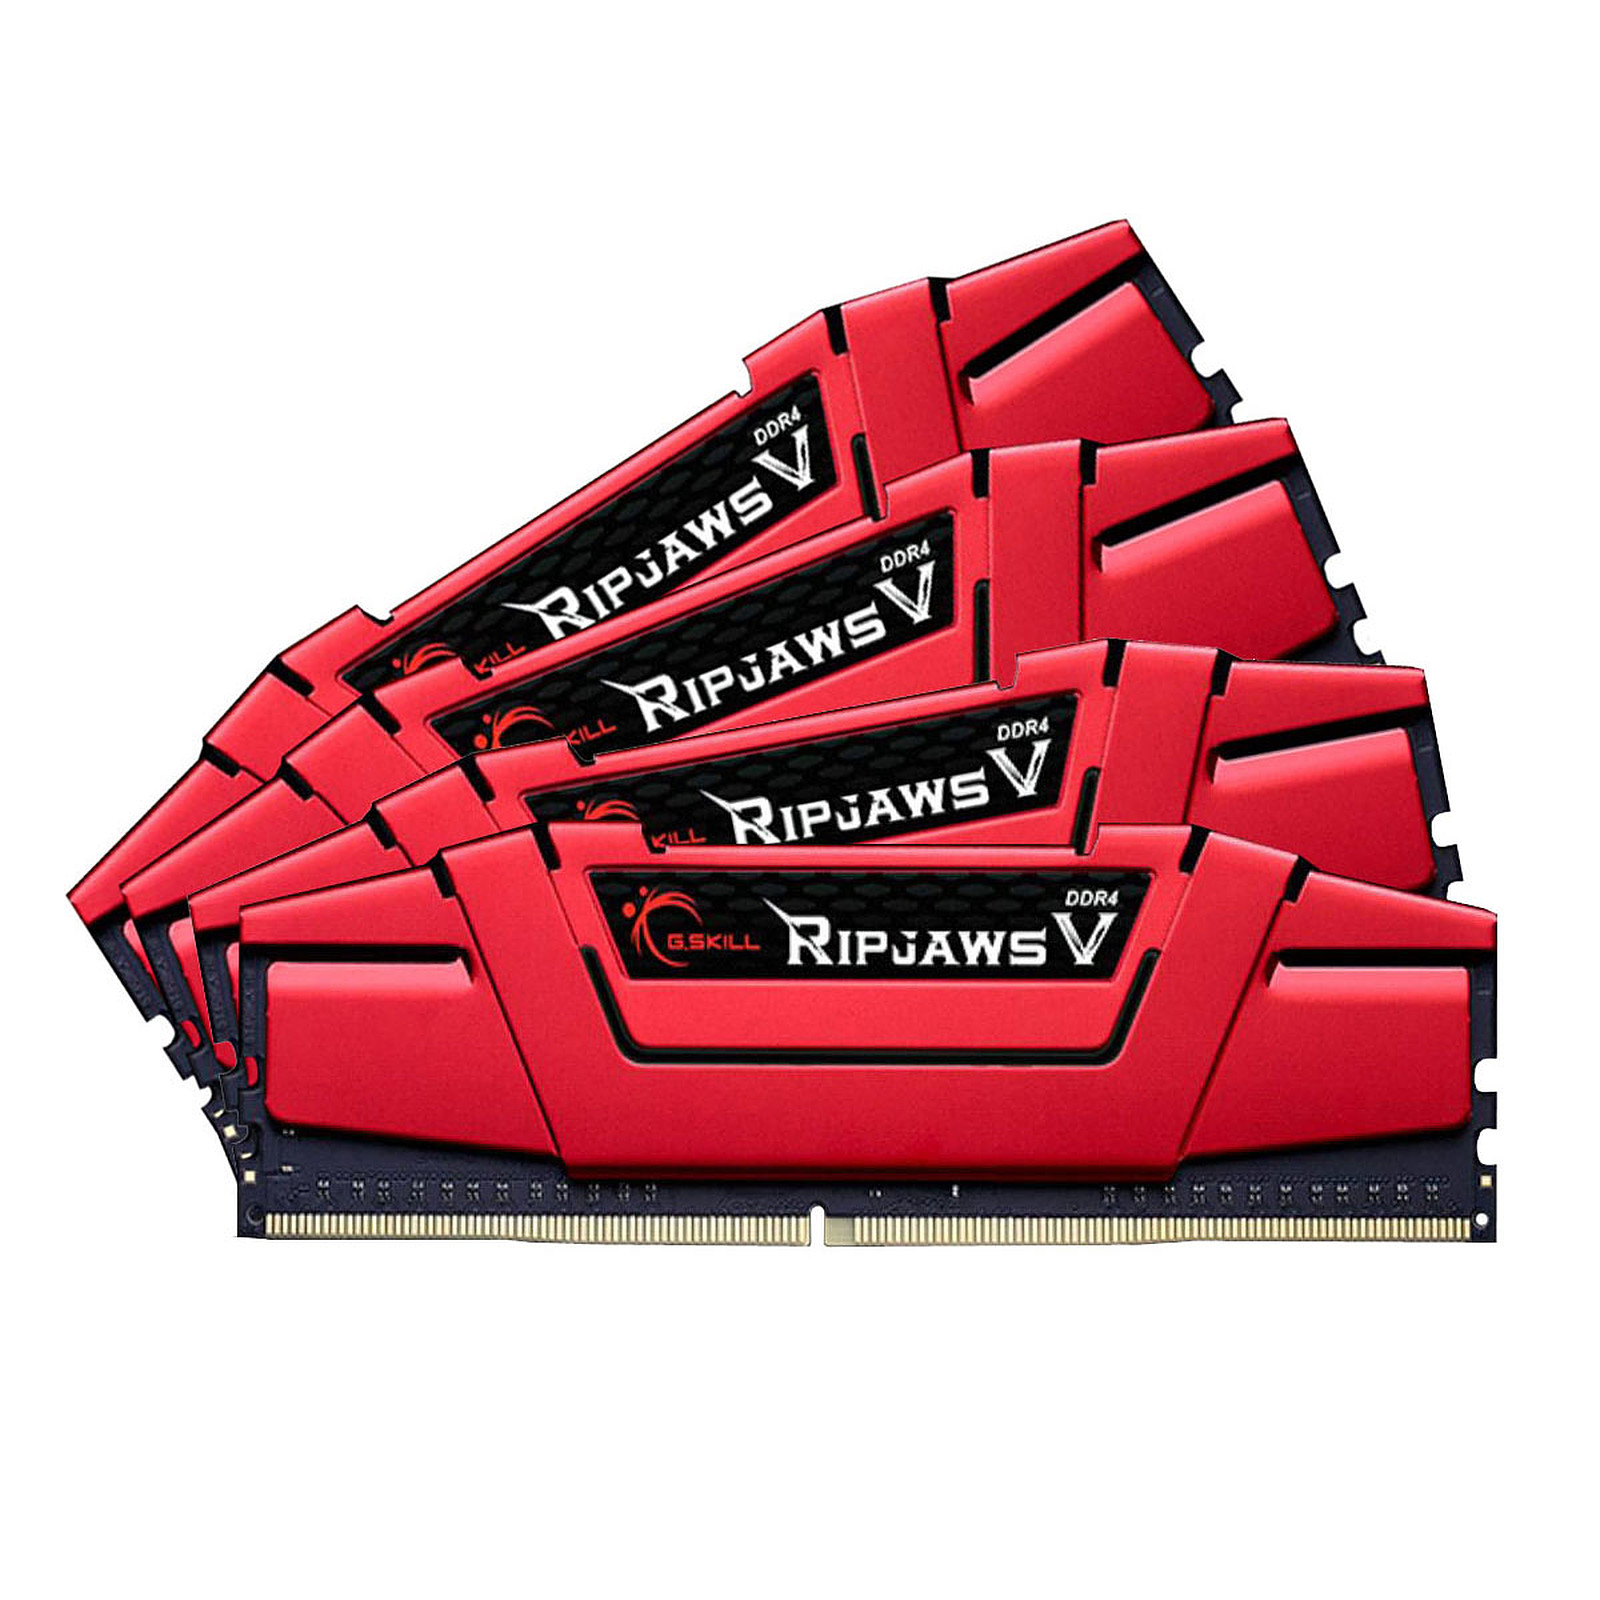 G.Skill RipJaws 5 Series Rouge 64 Go (4x16 Go) DDR4 3600 MHz CL19 - Memoire PC G.Skill